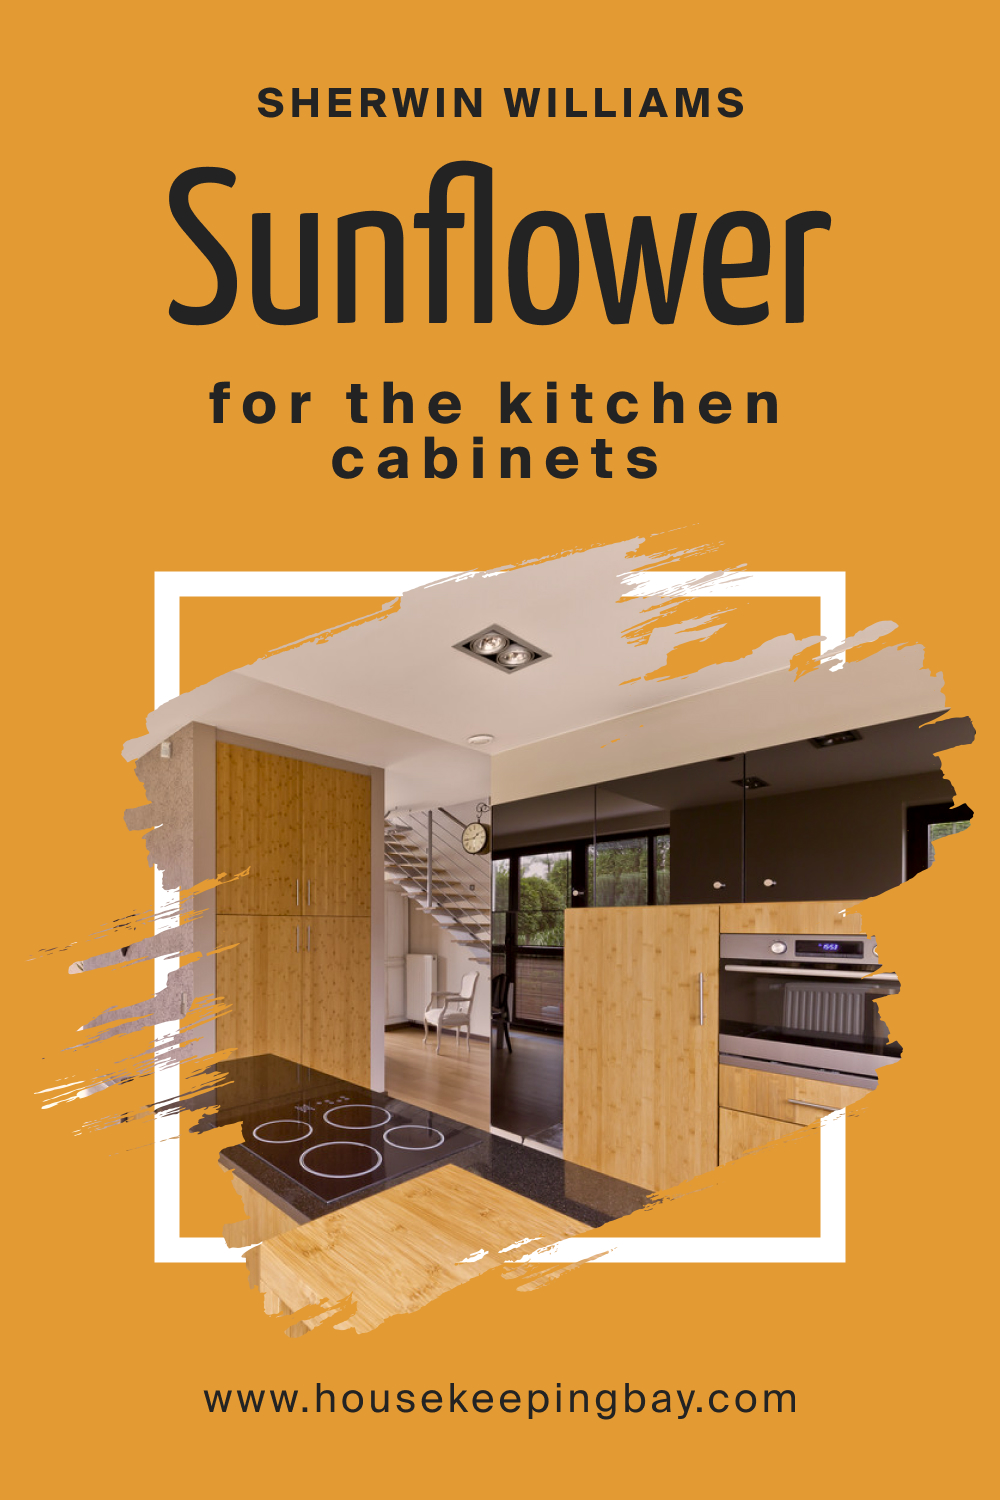 – Sherwin Williams. Sunflower SW 6678 For the Kitchen Cabinets